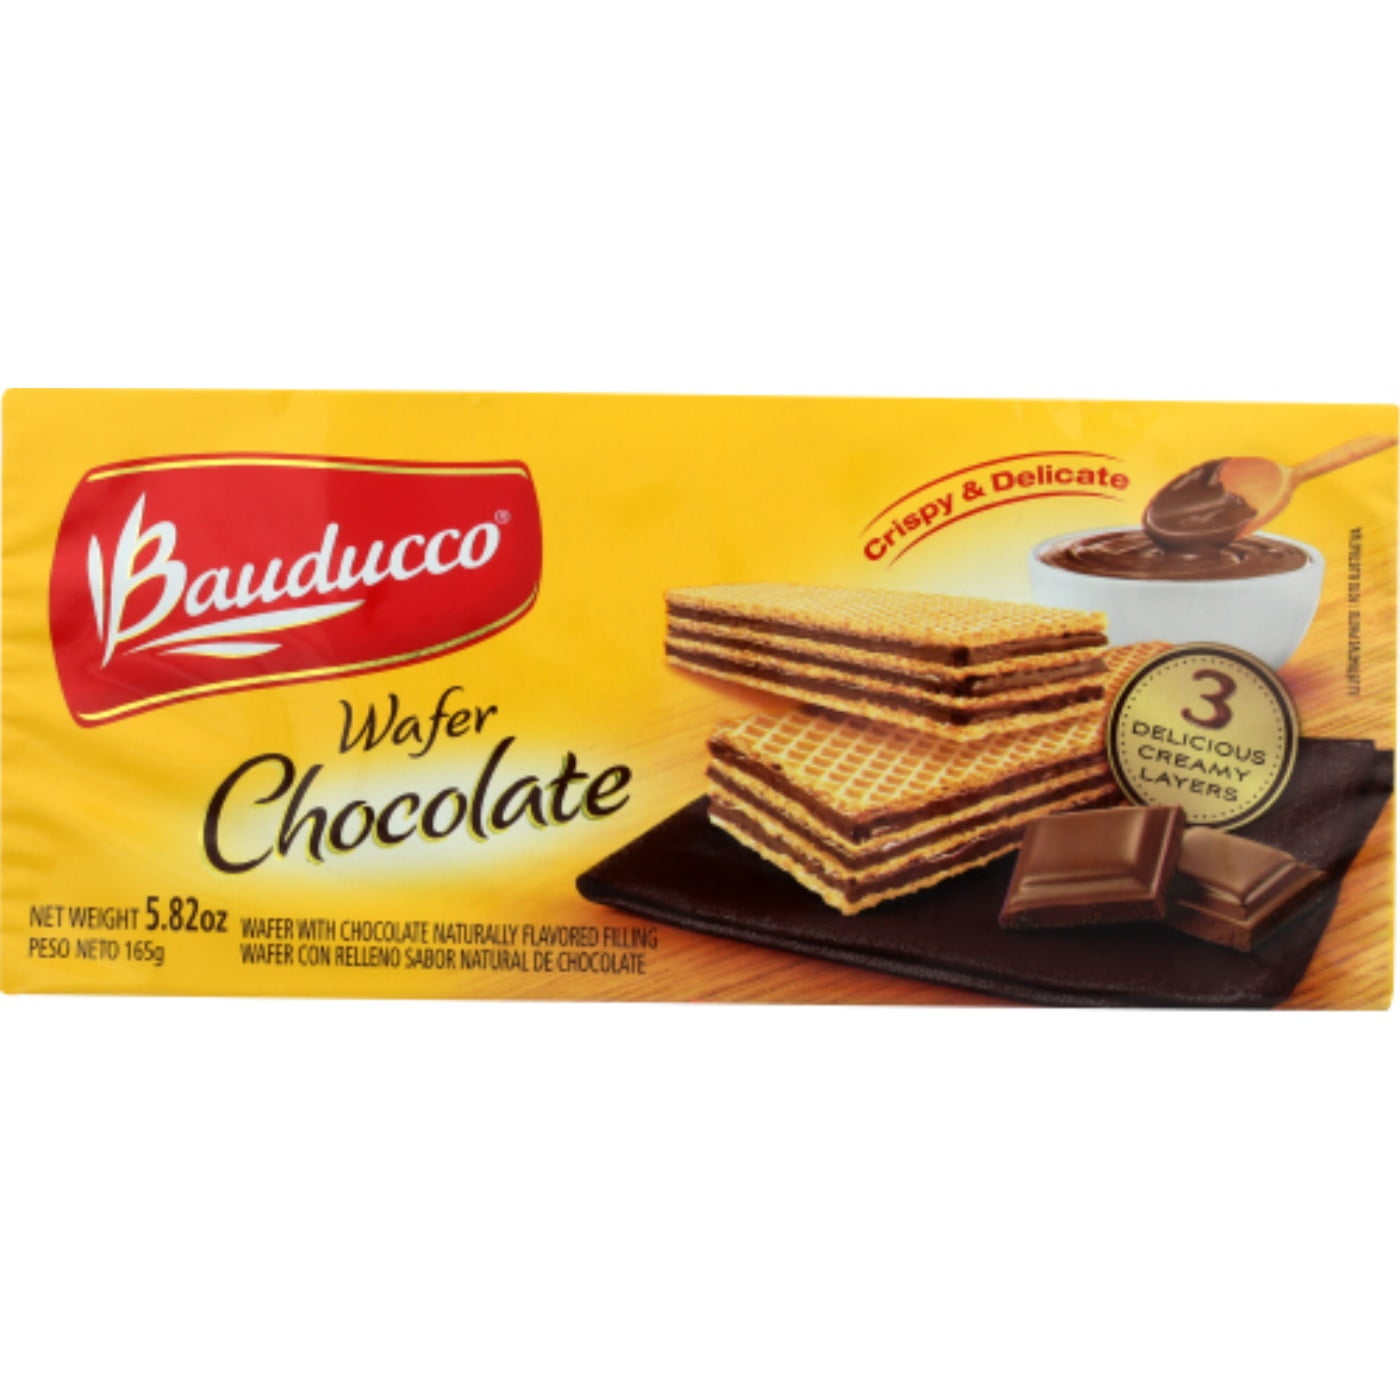 BAUDUCCO, COOKIE WAFER CHOC, 5.82 OZ, (Pack of 18)